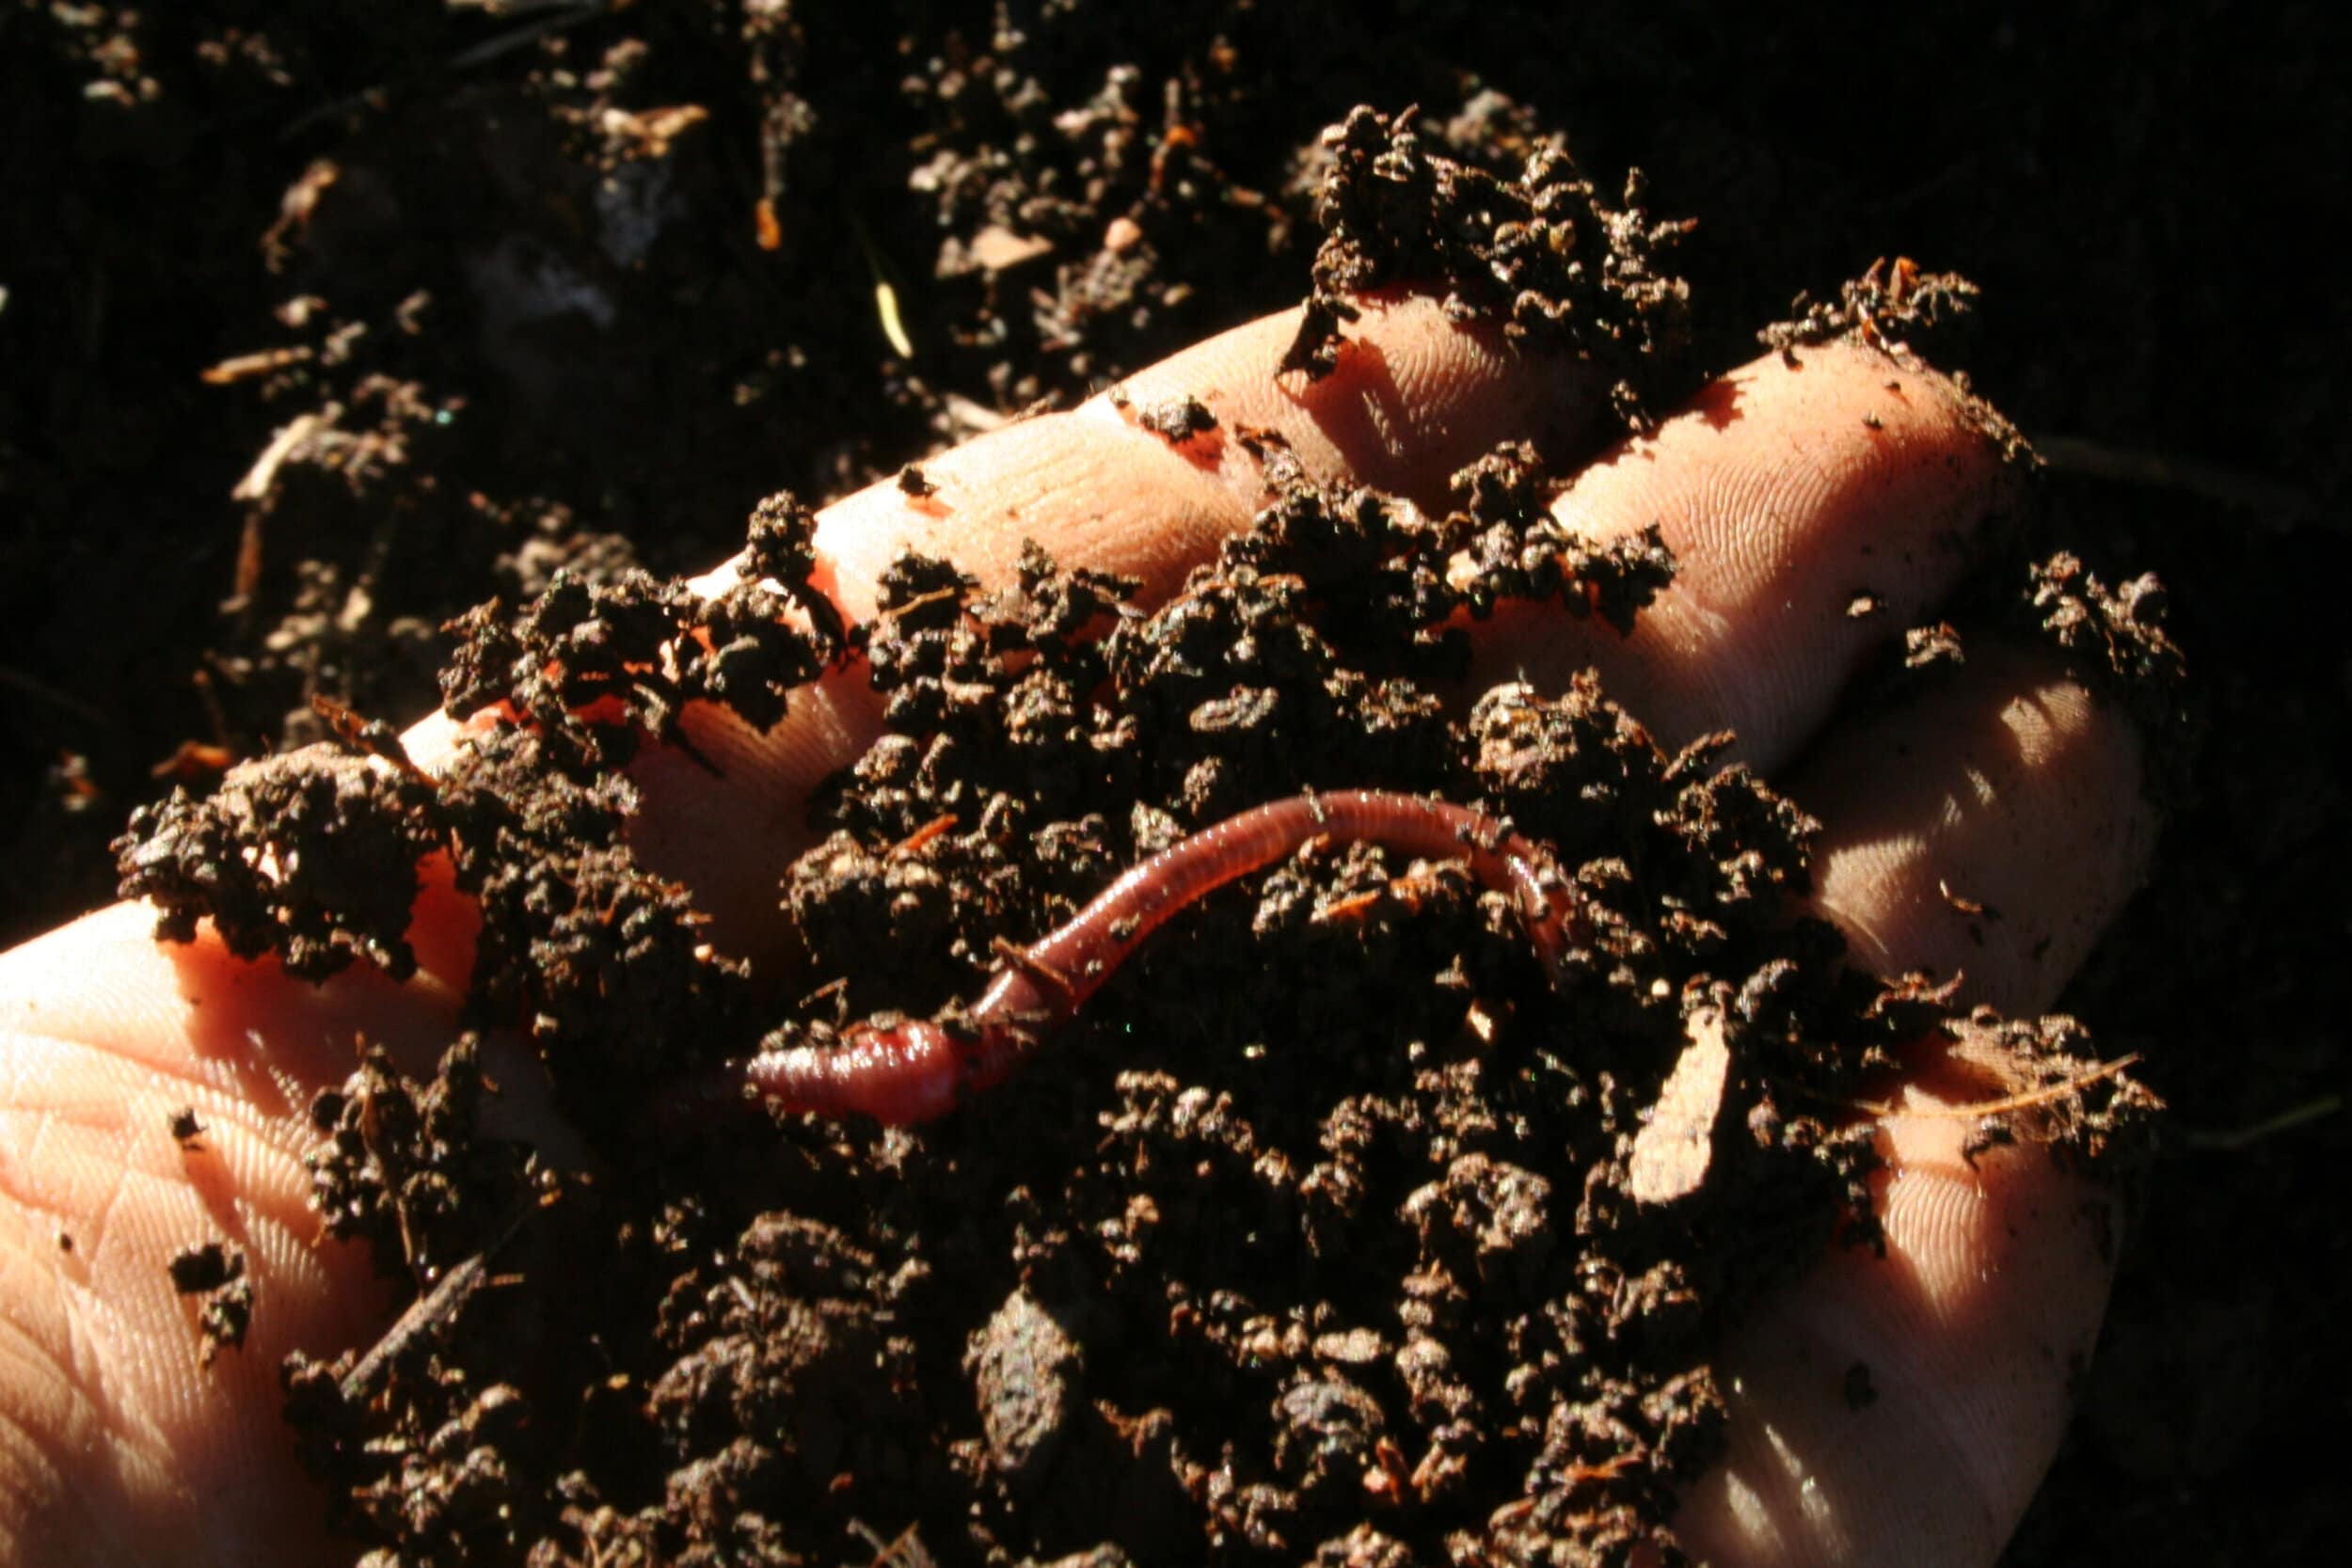 Hand with soil and worm.